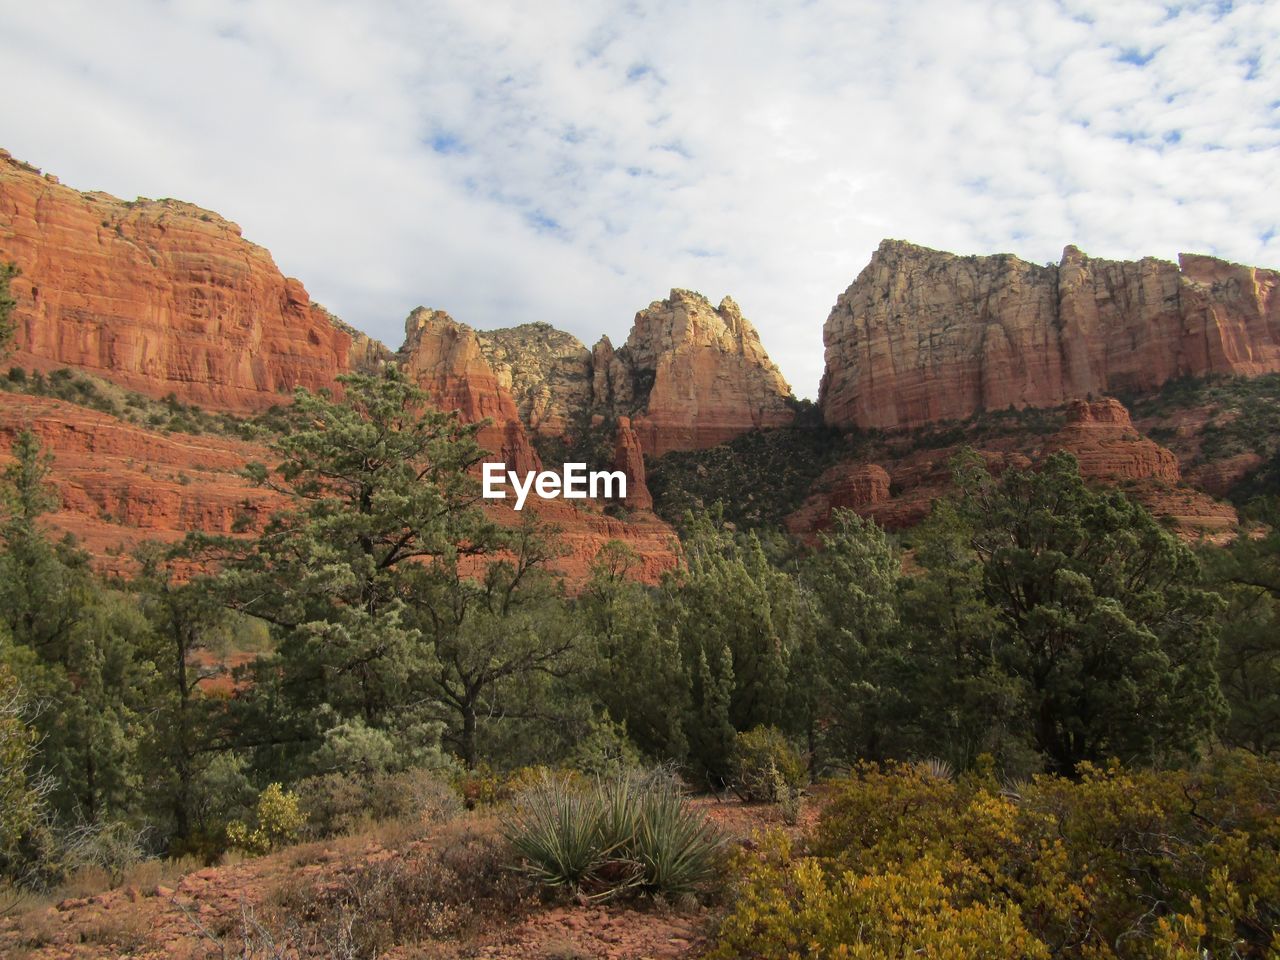 Red rock formations on landscape against cloudy sky